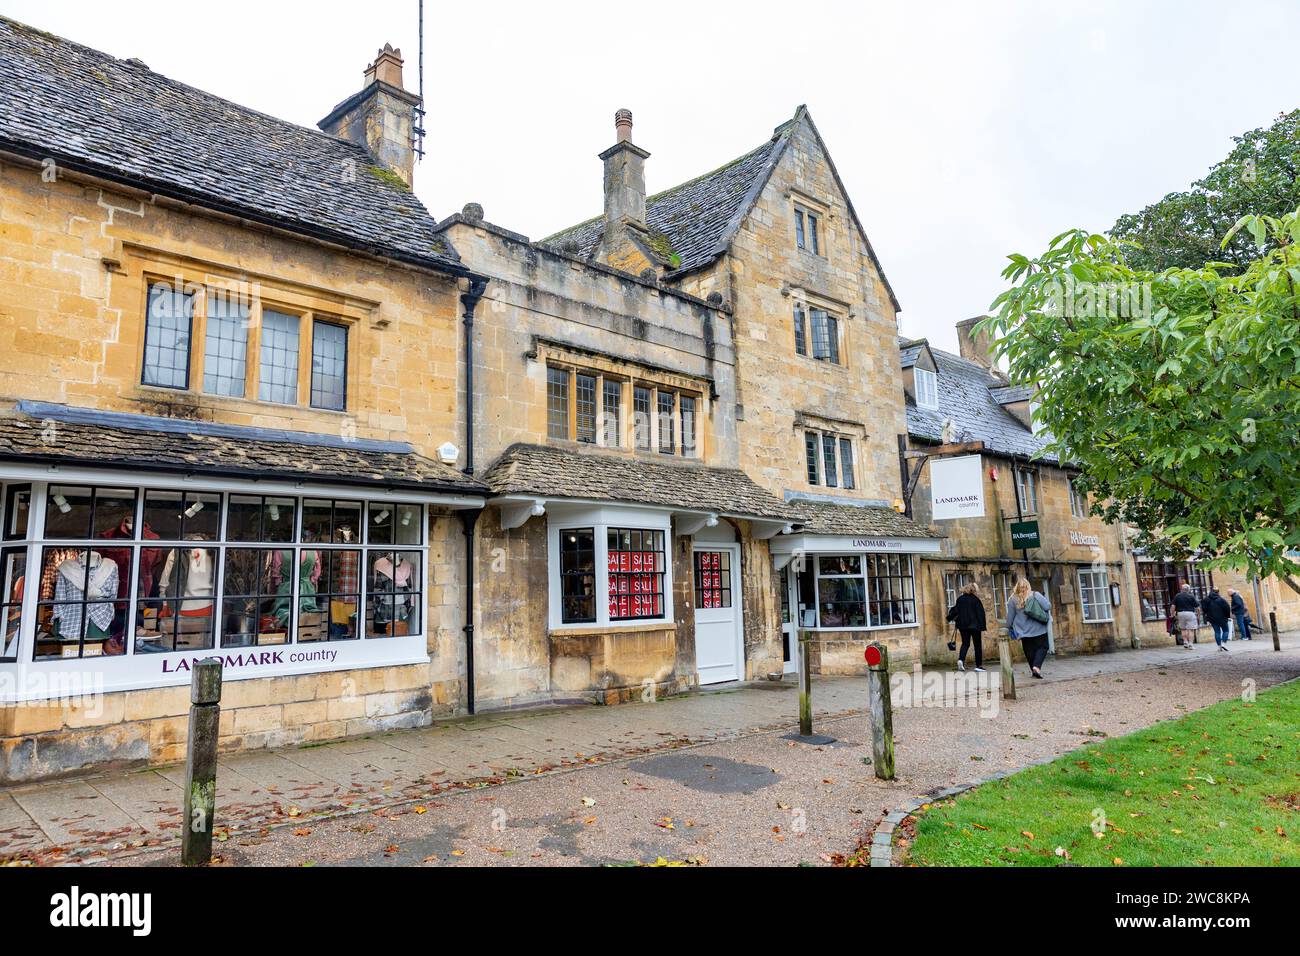 Broadway village in the English cotswolds, Landmark country clothing store in the high street, stone buildings, England,UK,2023 Stock Photo